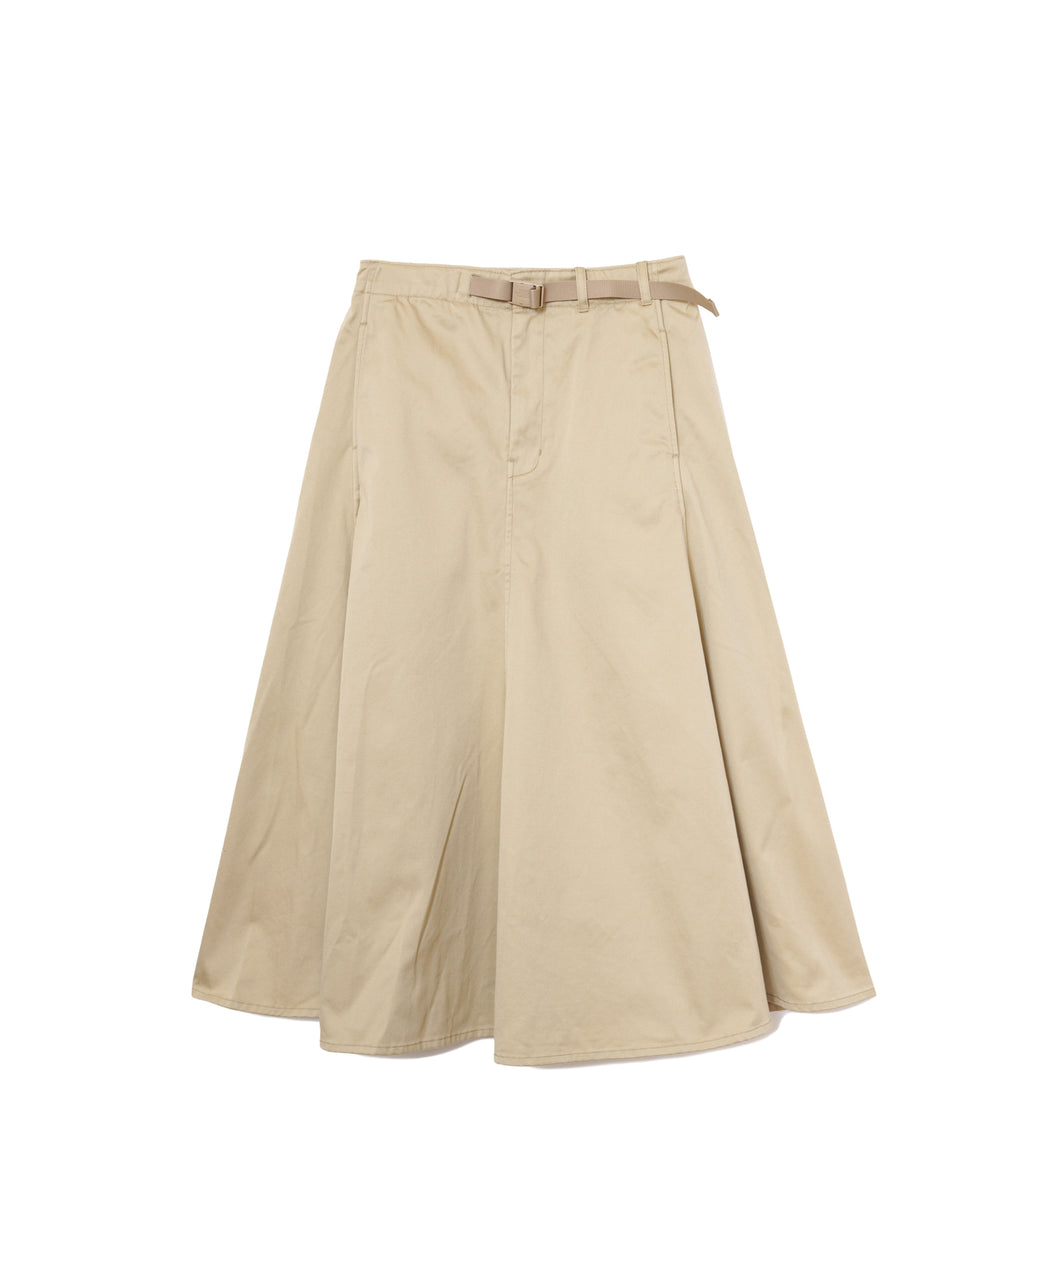 【WOMEN】THE NORTH FACE PURPLE LABEL Chino Flared Field Skirt